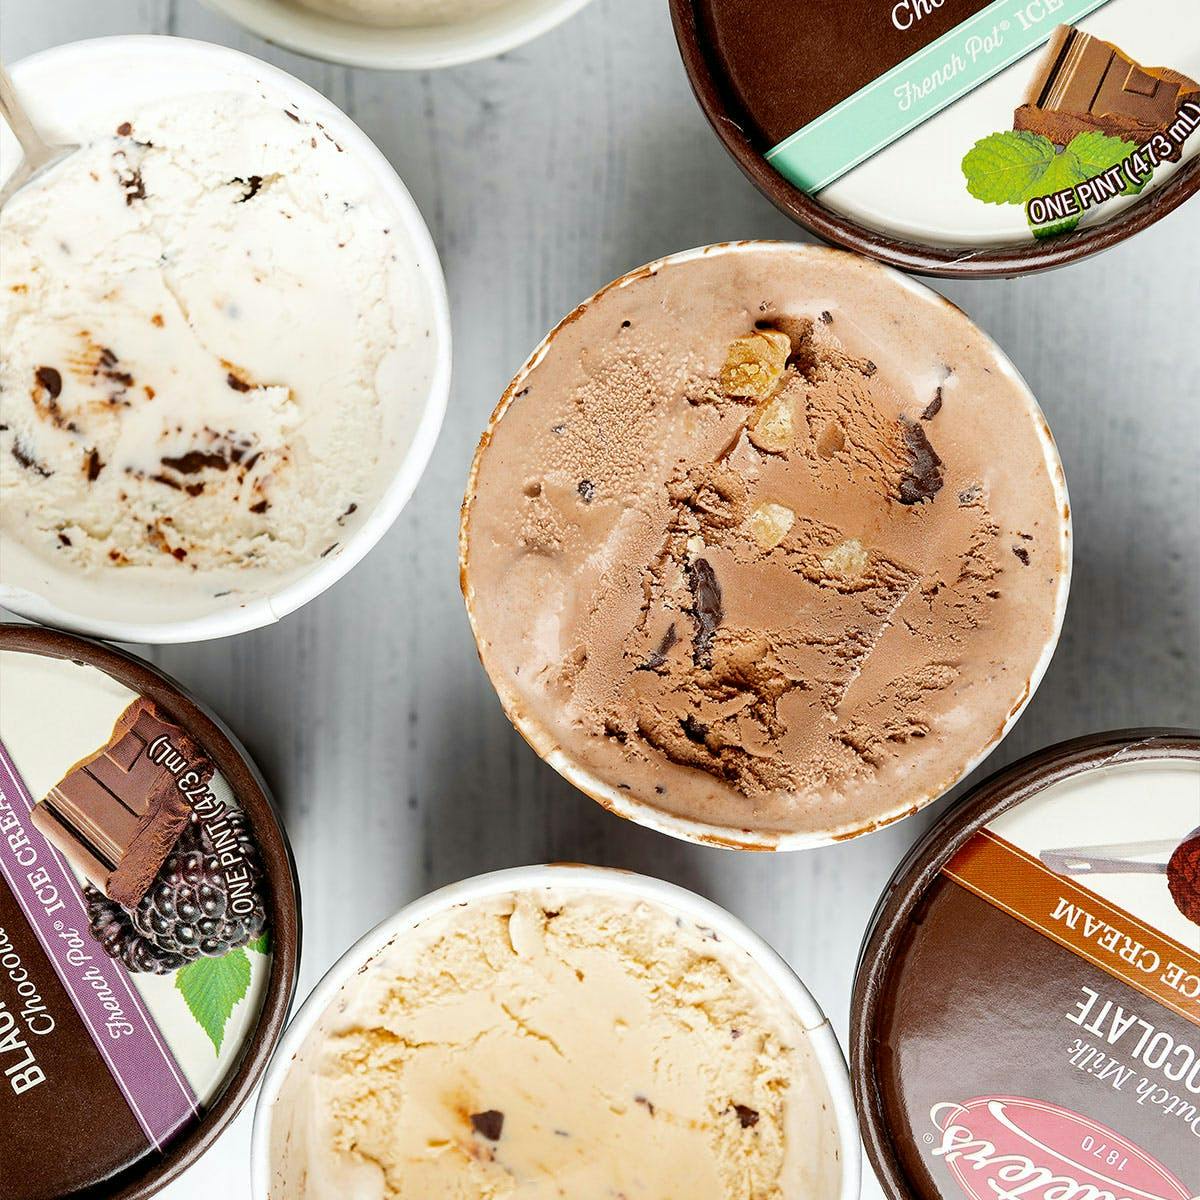 Best Sellers Ice Cream Collection